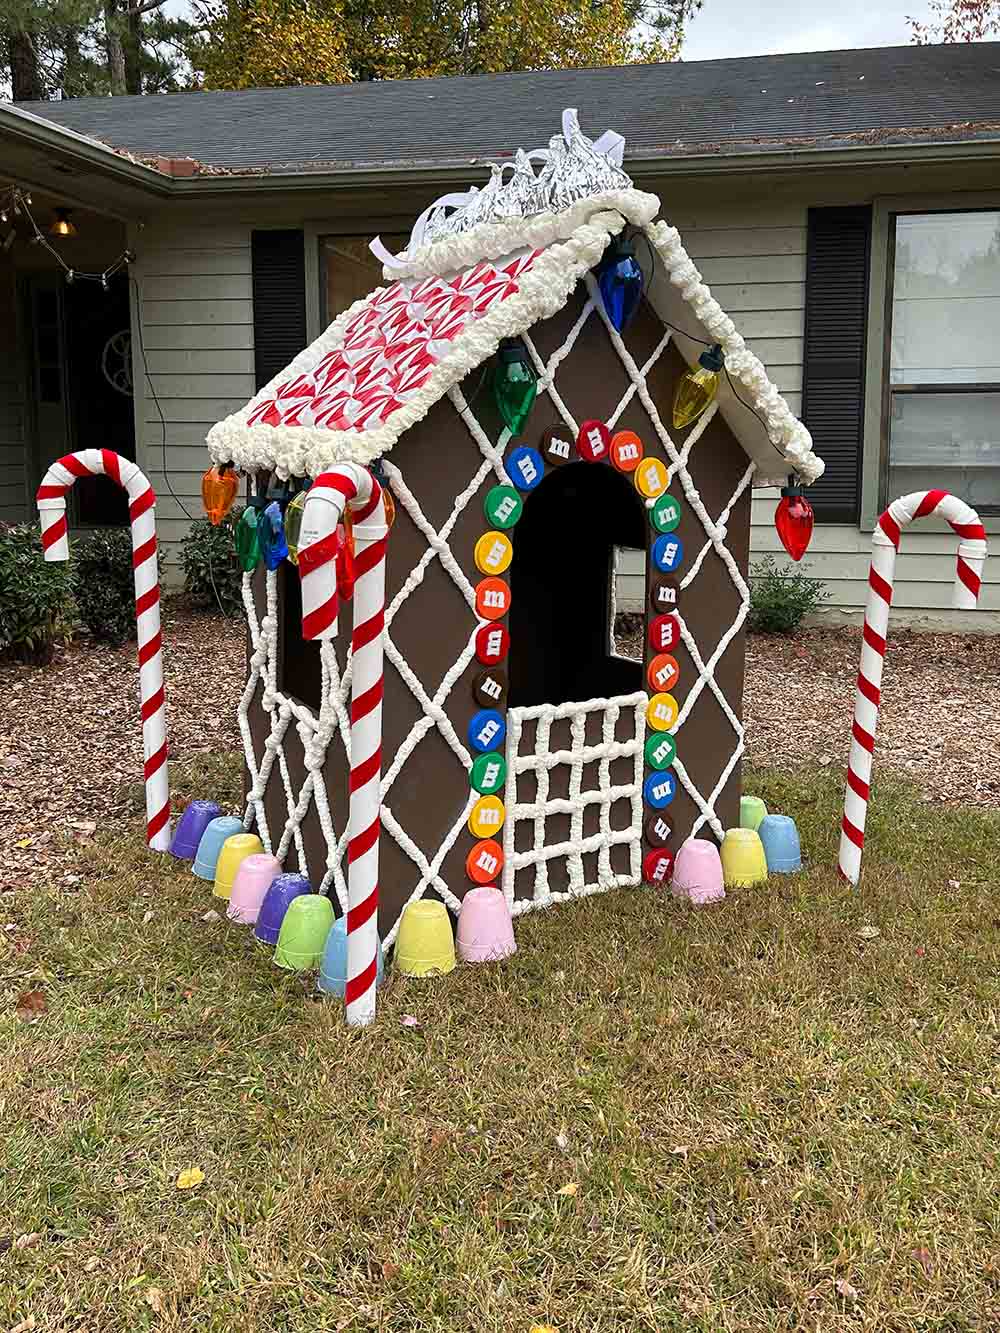 A life size wooden gingerbread house.